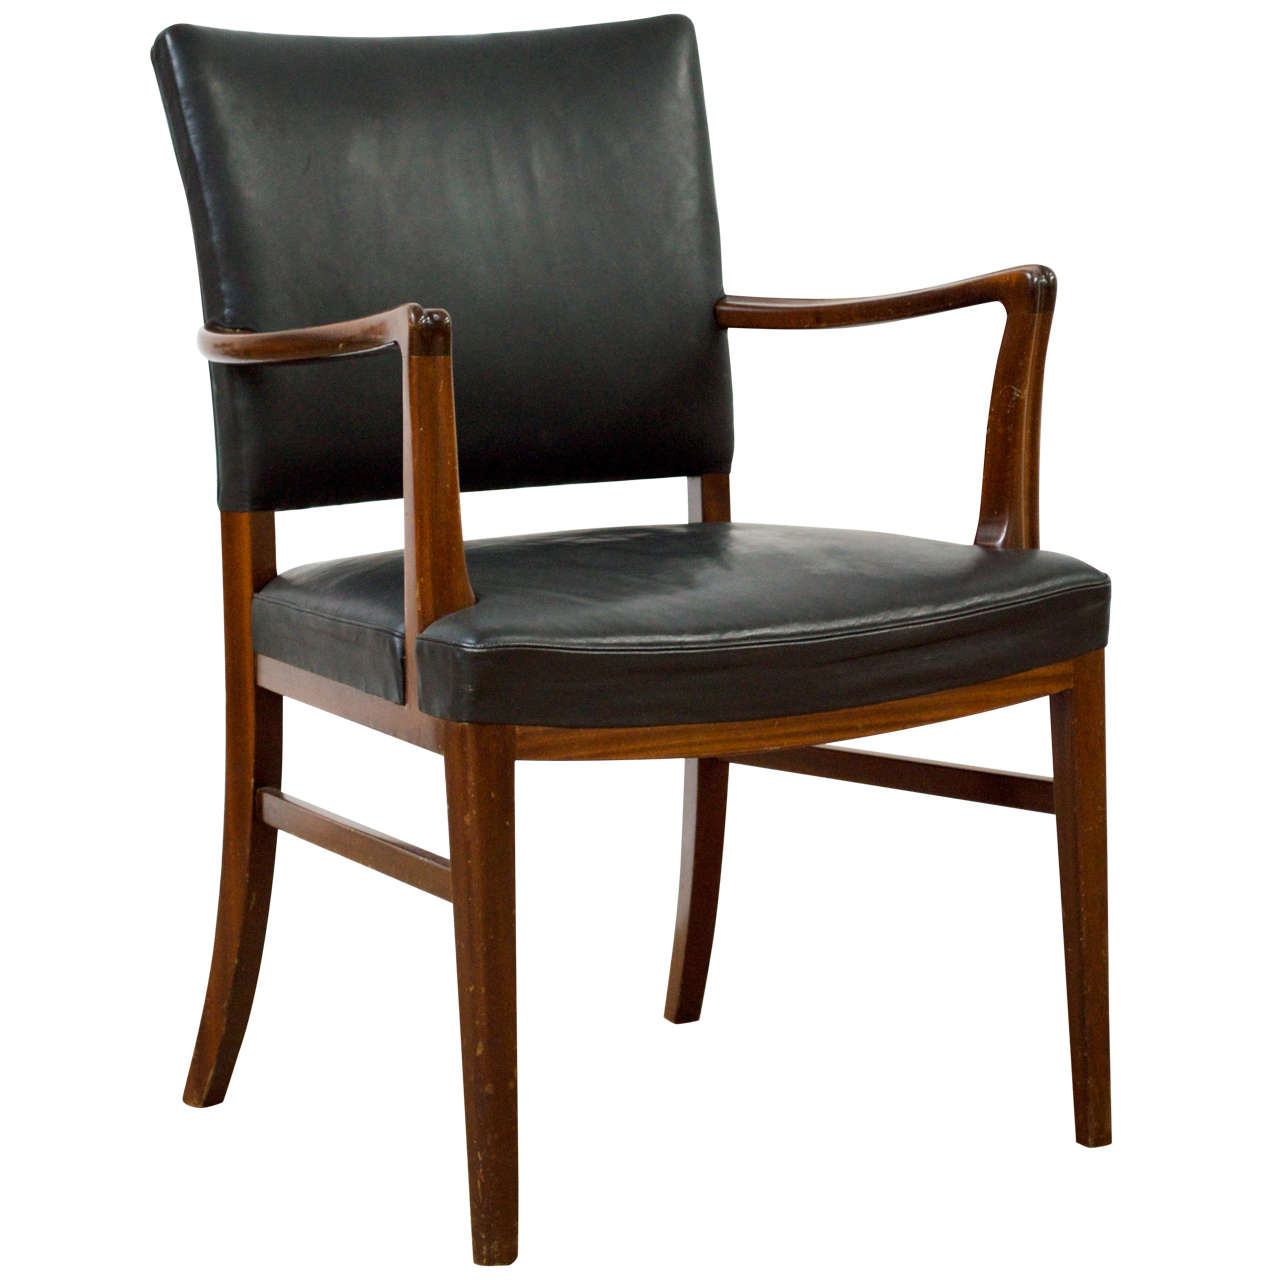 Ole Wanscher - Arm Chair of Rosewood and Leather